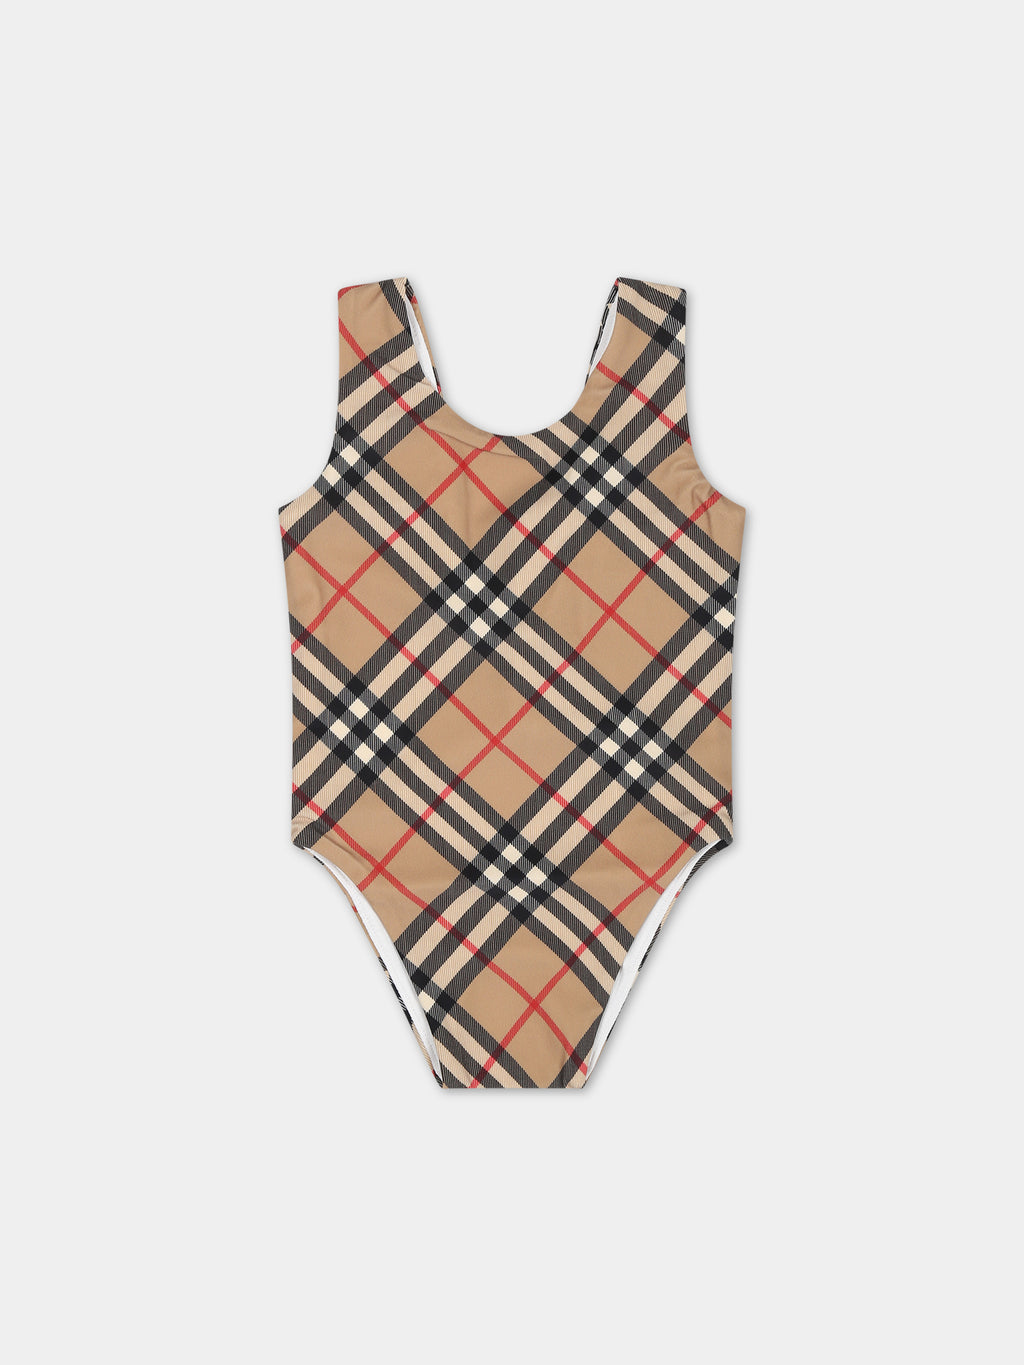 Beige swimsuit for baby girl with iconic check